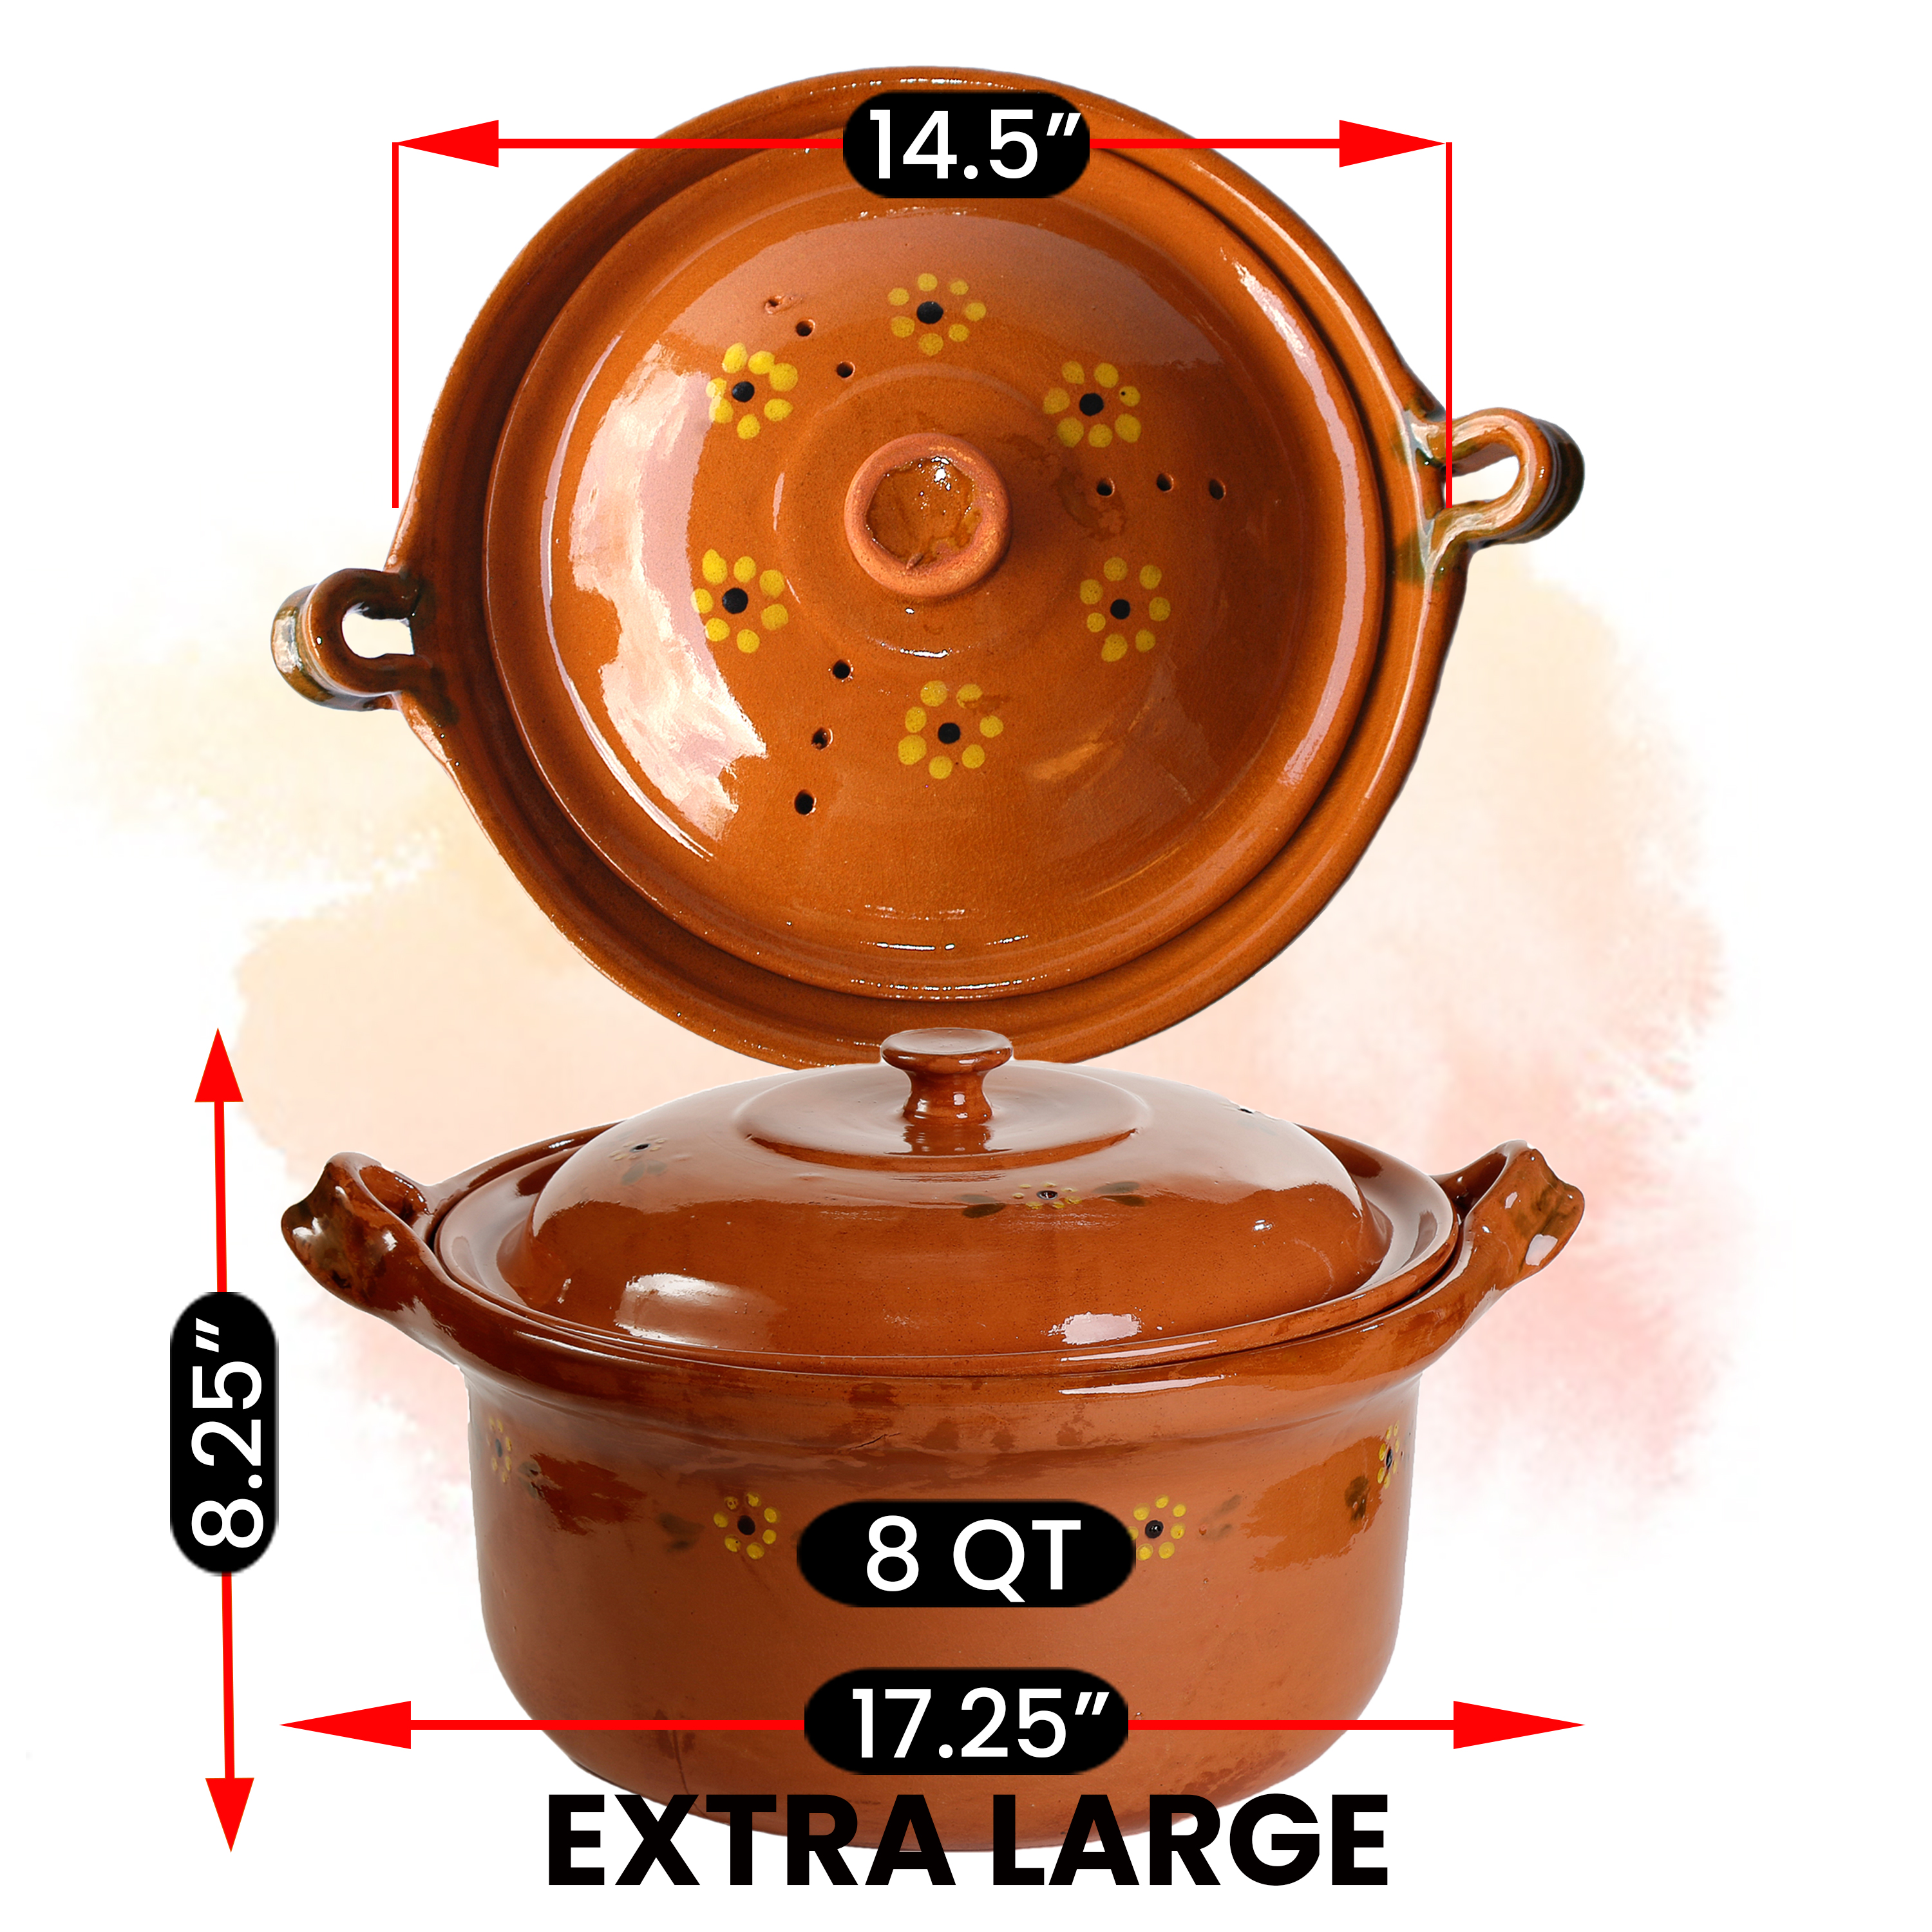 https://ancientcookware.com/images/stories/virtuemart/product/mex_3030_17_5_Large_with_measurements1.jpg